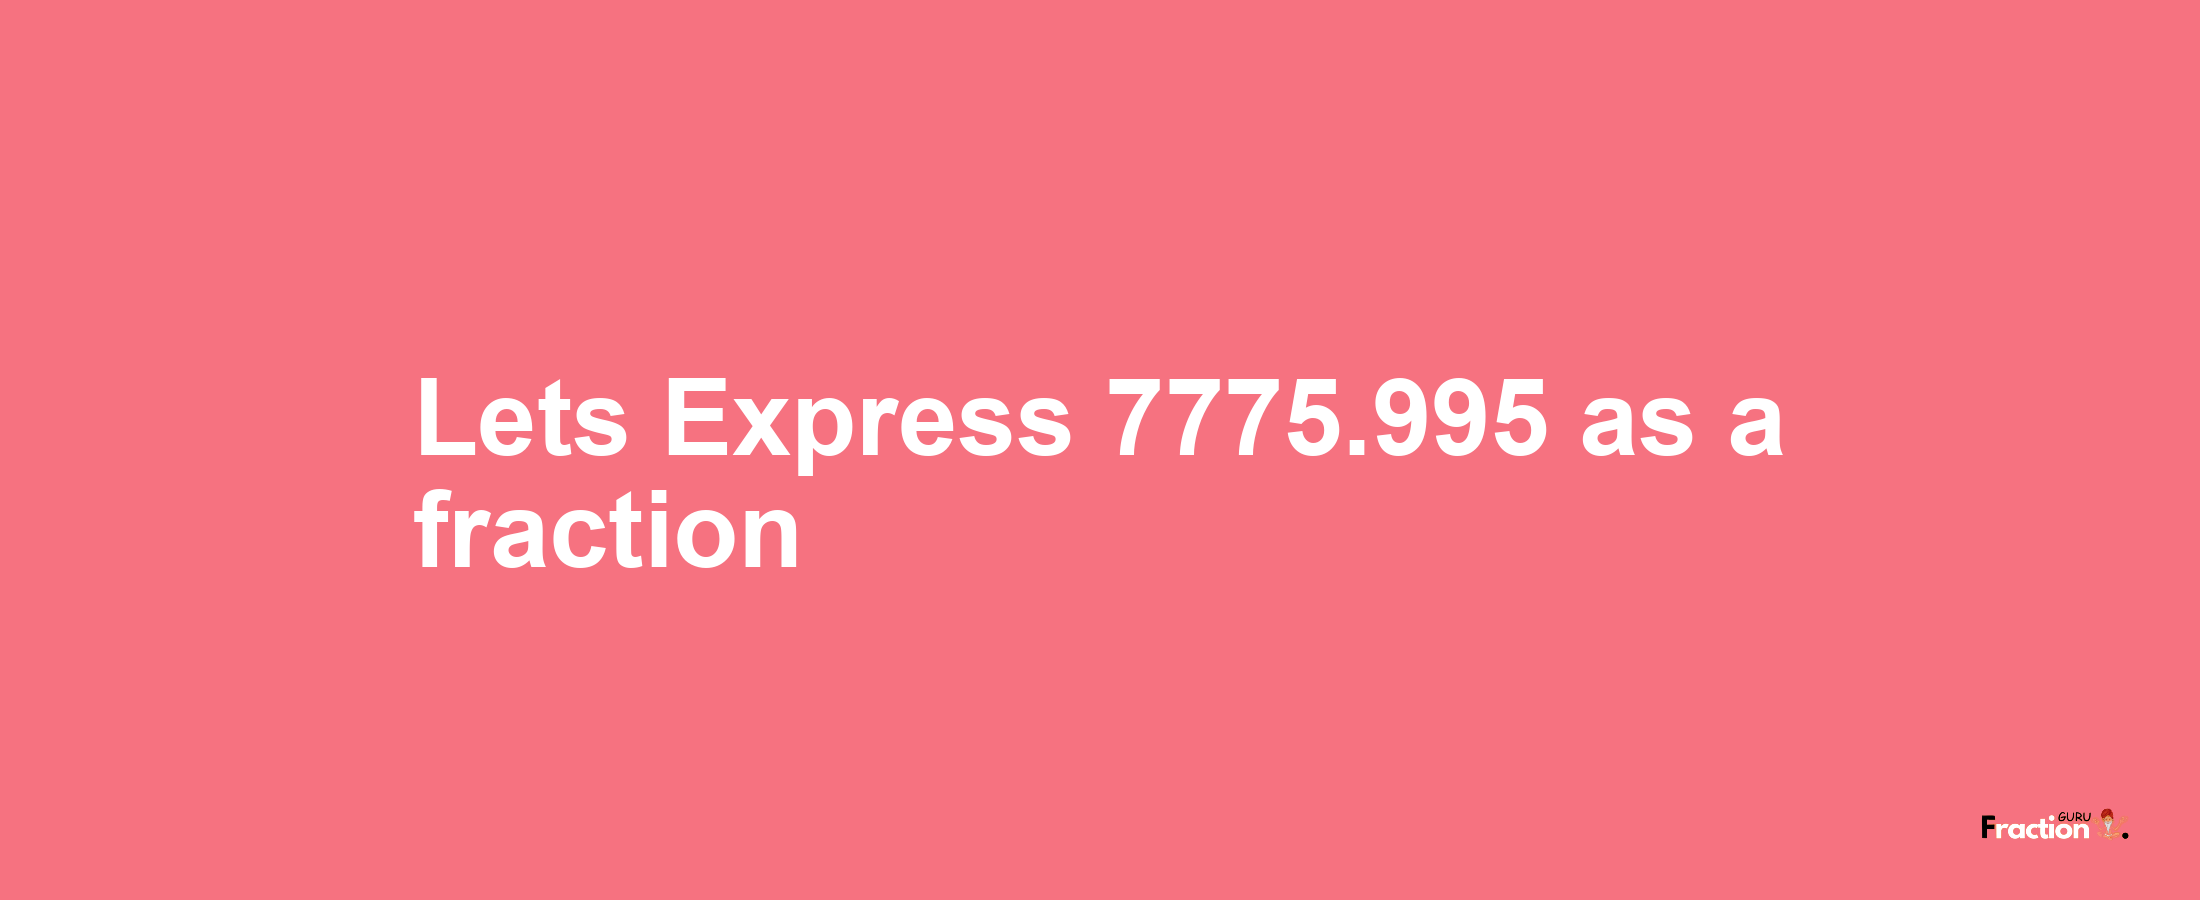 Lets Express 7775.995 as afraction